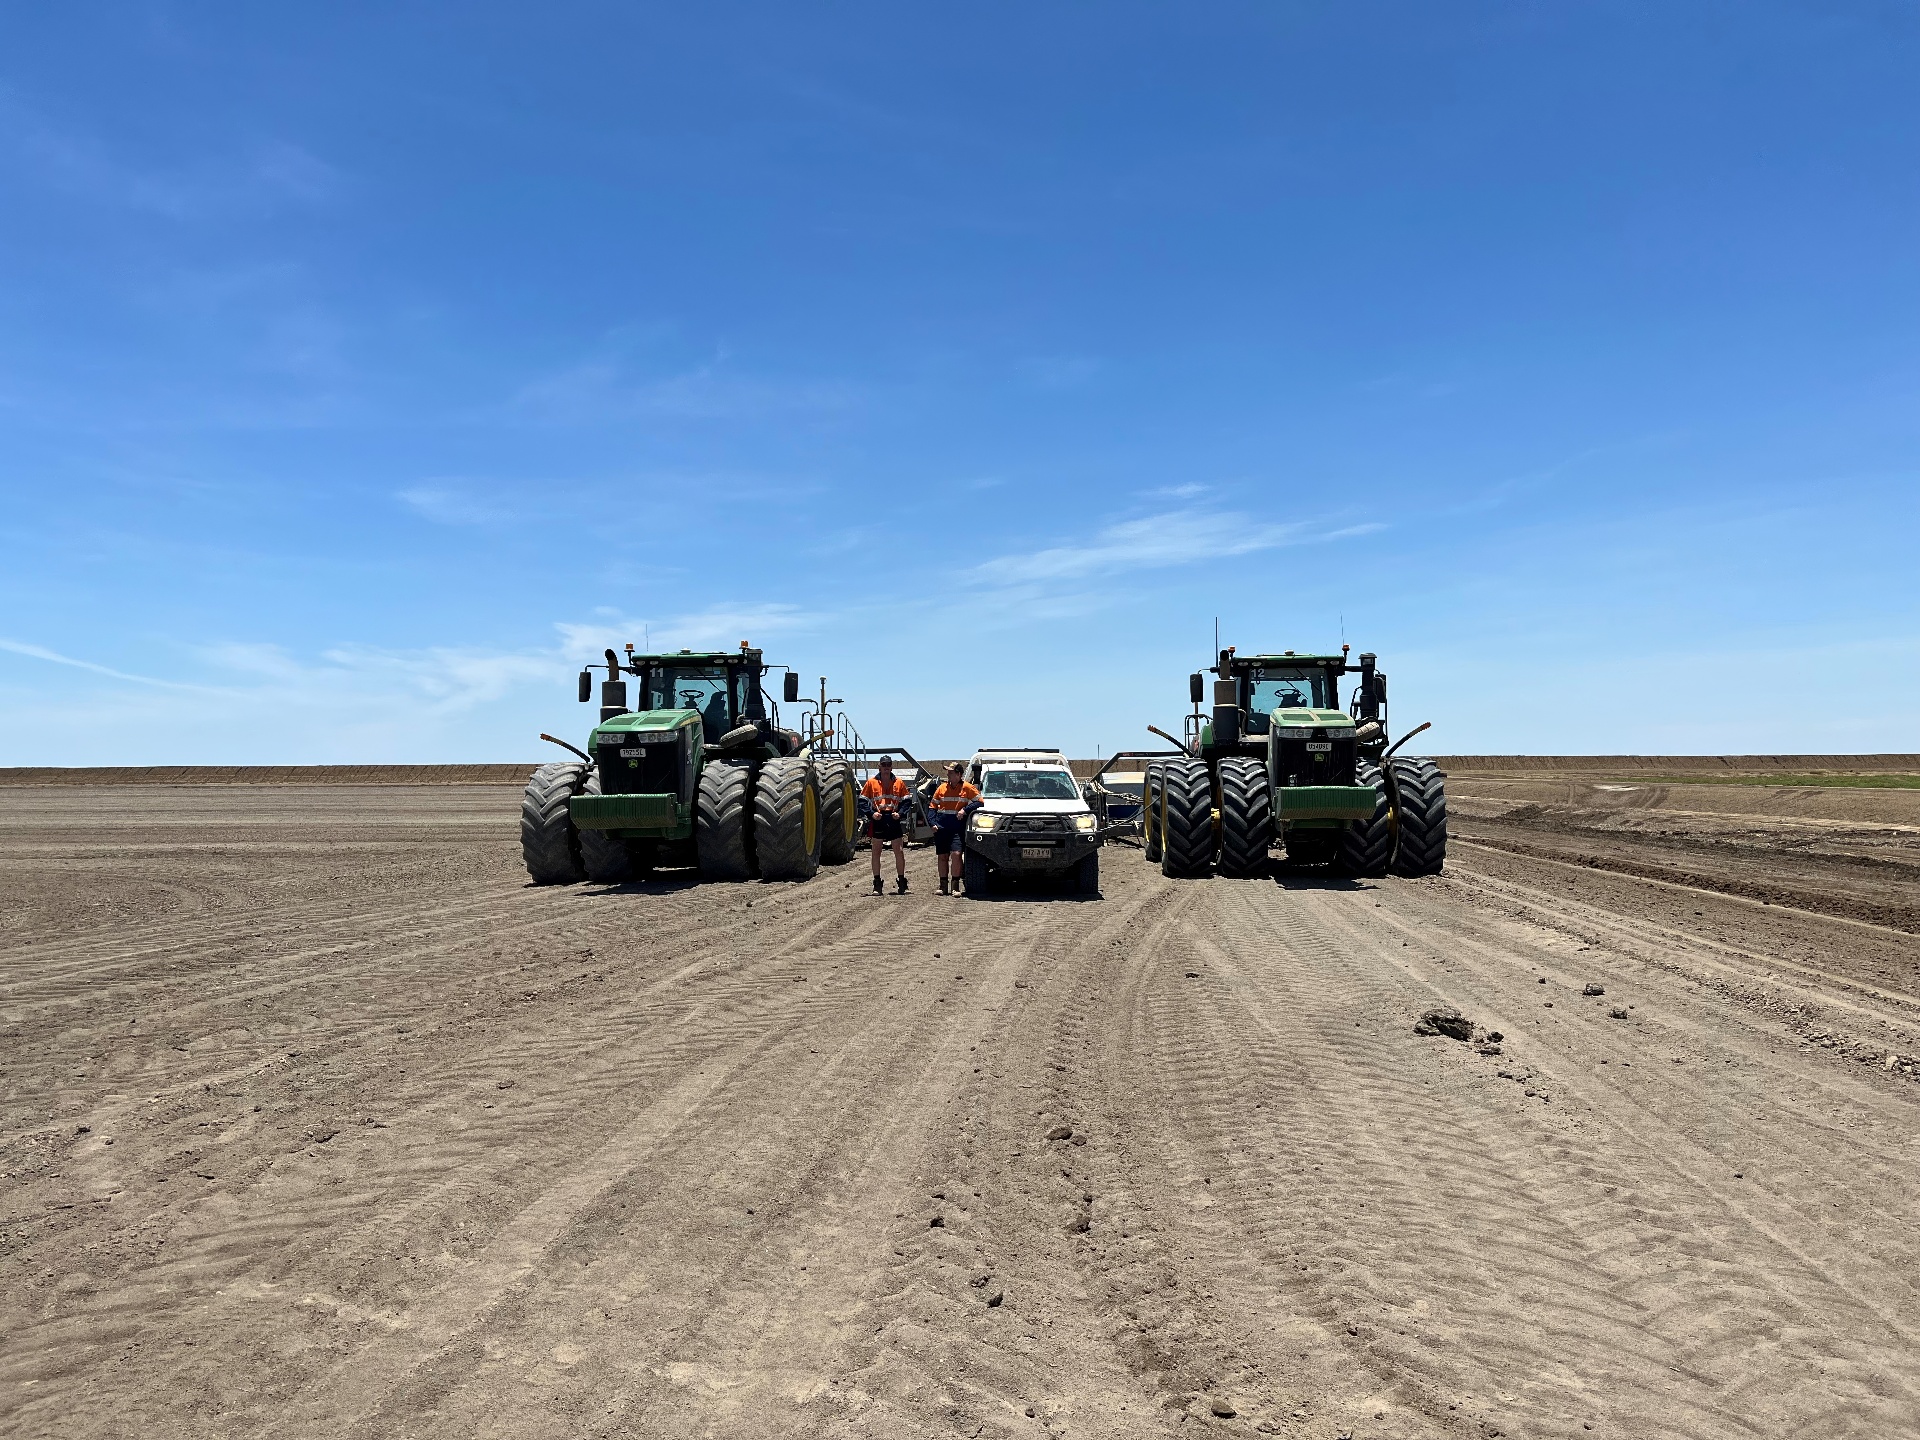 Two tractors are parked in a dirt field. In between them two people in hi-viz vests standing next to a white ute